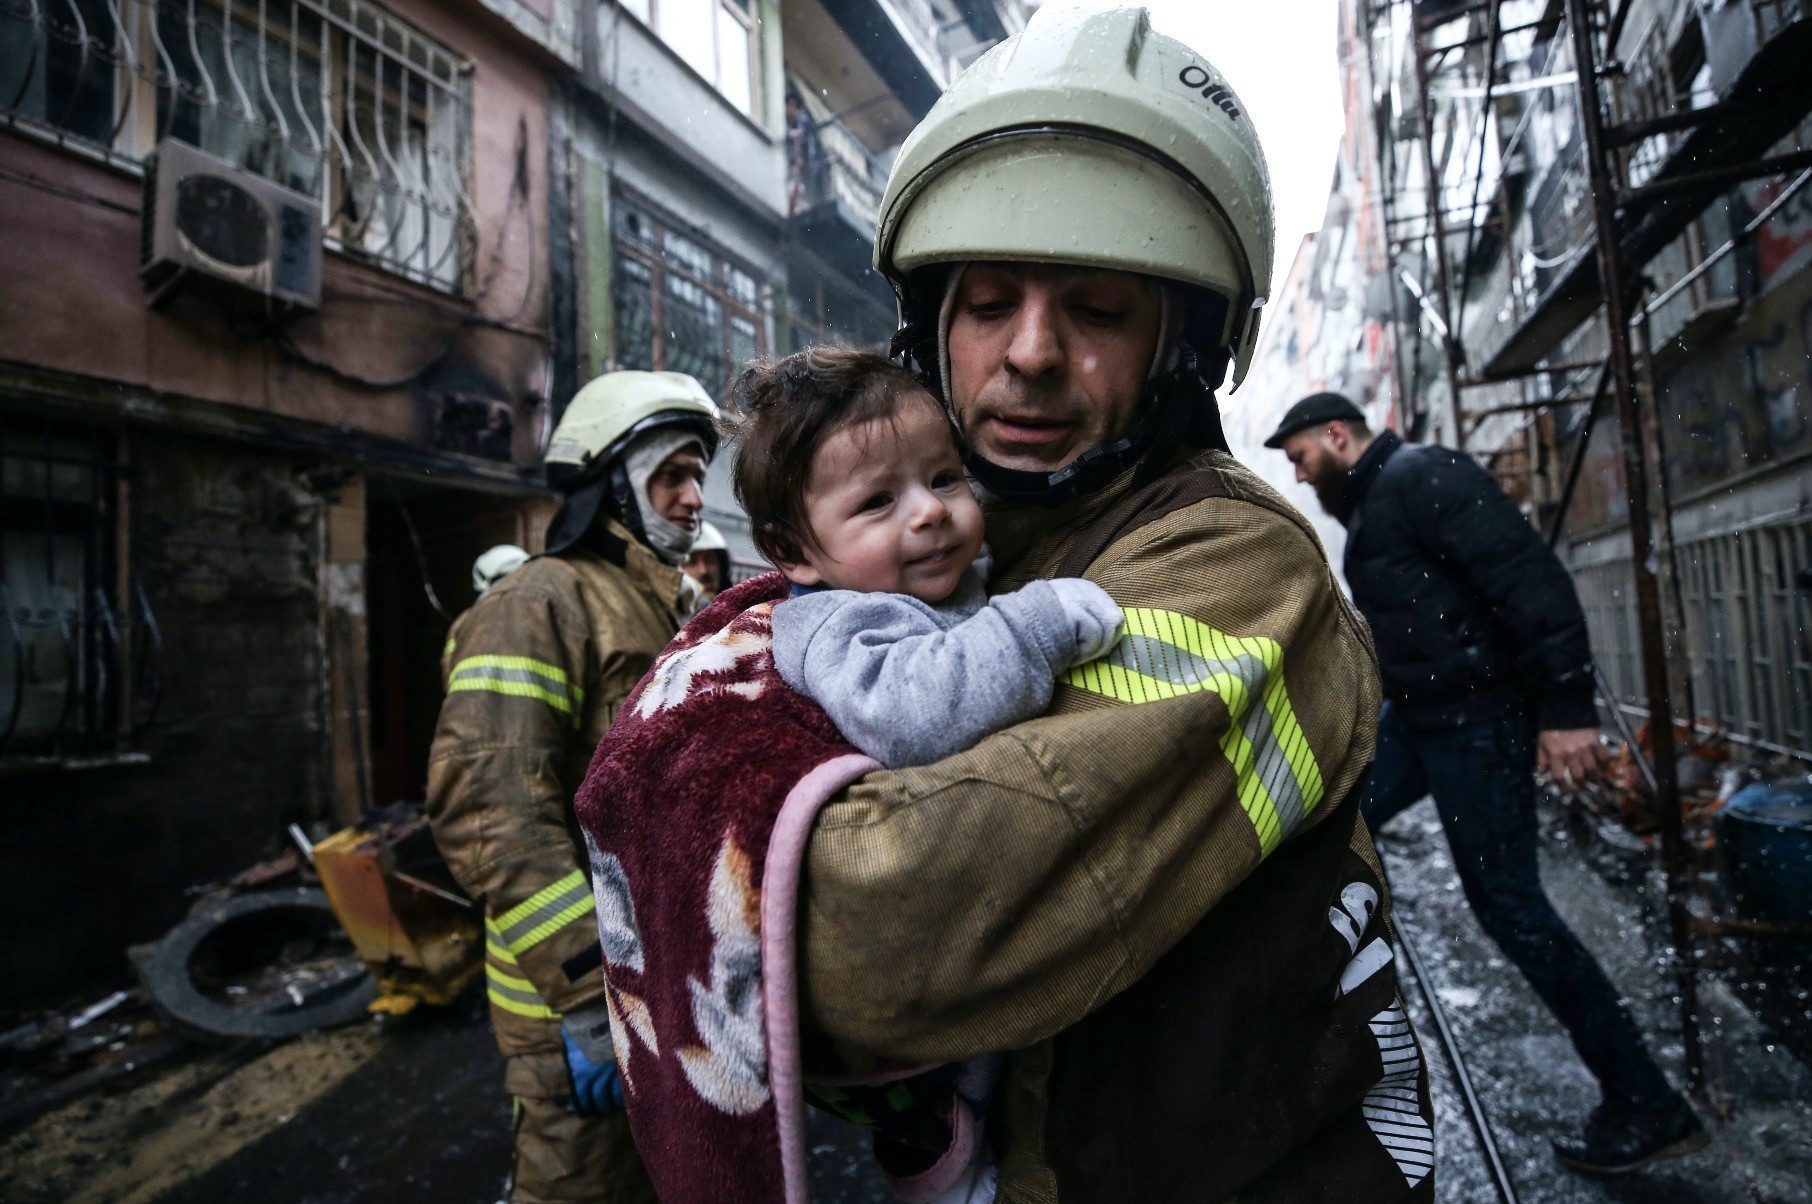 A firefighter saves a baby from house fire due to a natural gas explosion, Fatih, Istanbul.  